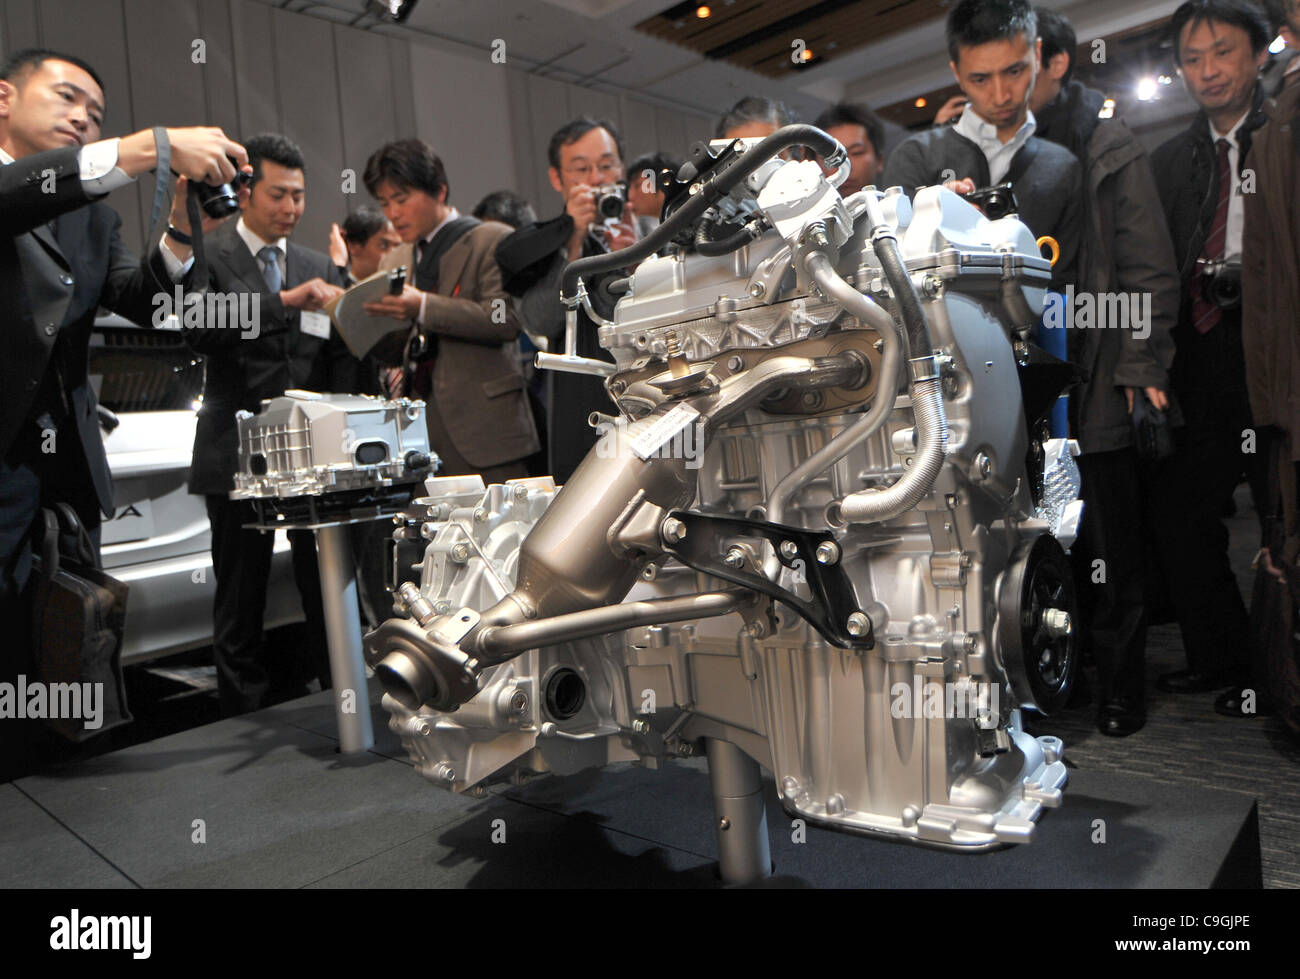 December 26, 2011, Tokyo, Japan - Reporters take a closer look at the engine of Toyota's Aqua compact hybrid model during a launch at TokyoMidtown Hall on Monday, December 26, 2011. The Aqua, a smaller version of Prius C, is a compact hatchback with the companys Hybrid Synergy Drive system, measurin Stock Photo